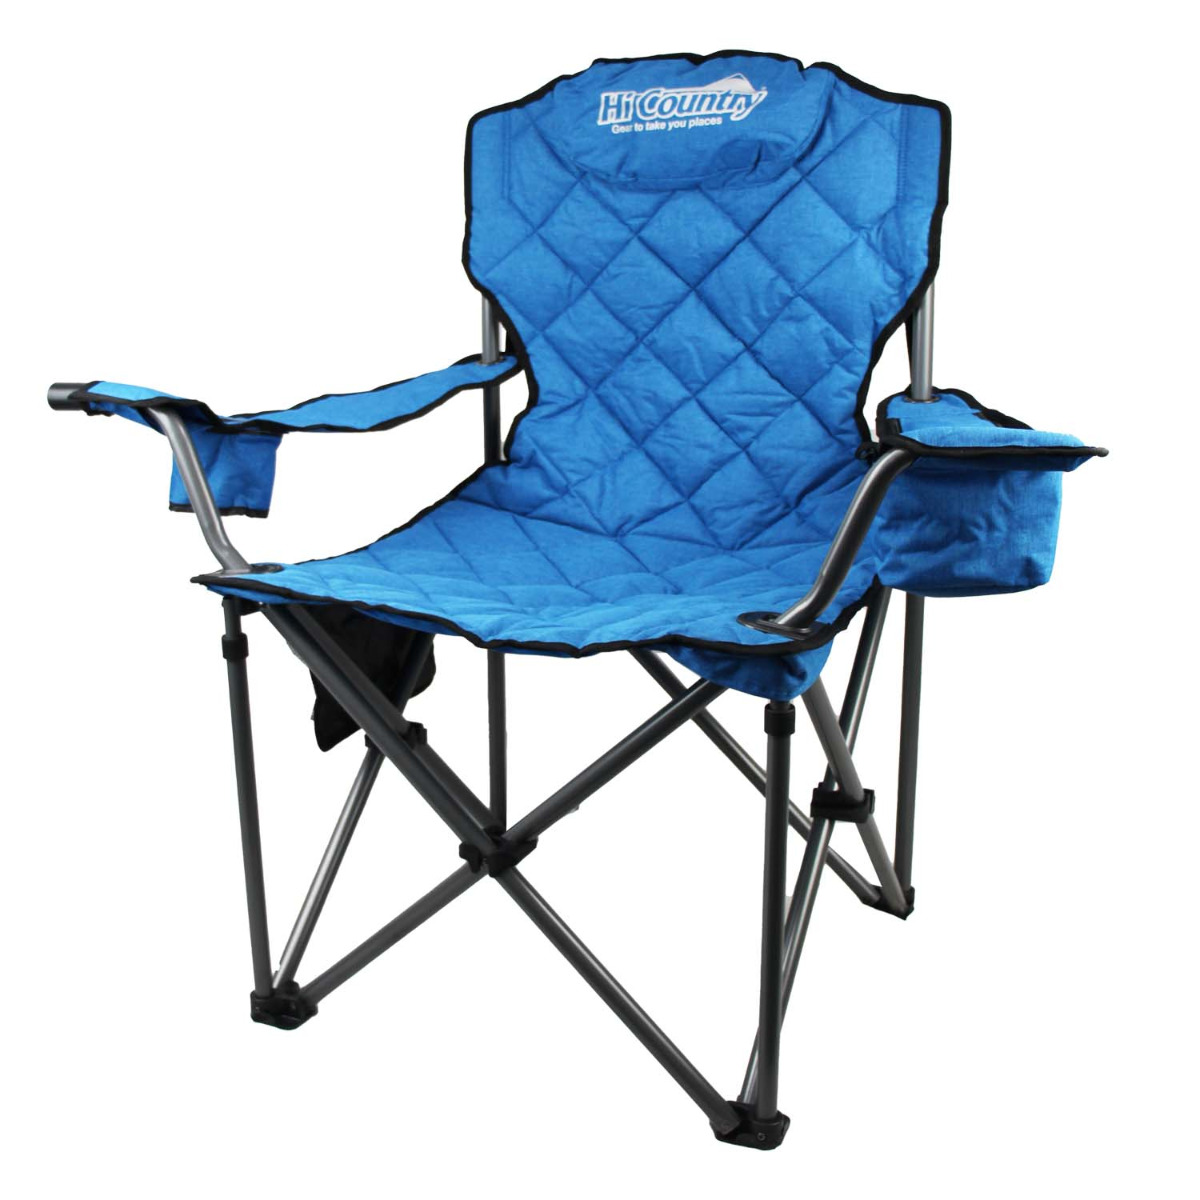 HI-COUNTRY DELUXE EXECUTIVE RESORT CHAIR BLUE